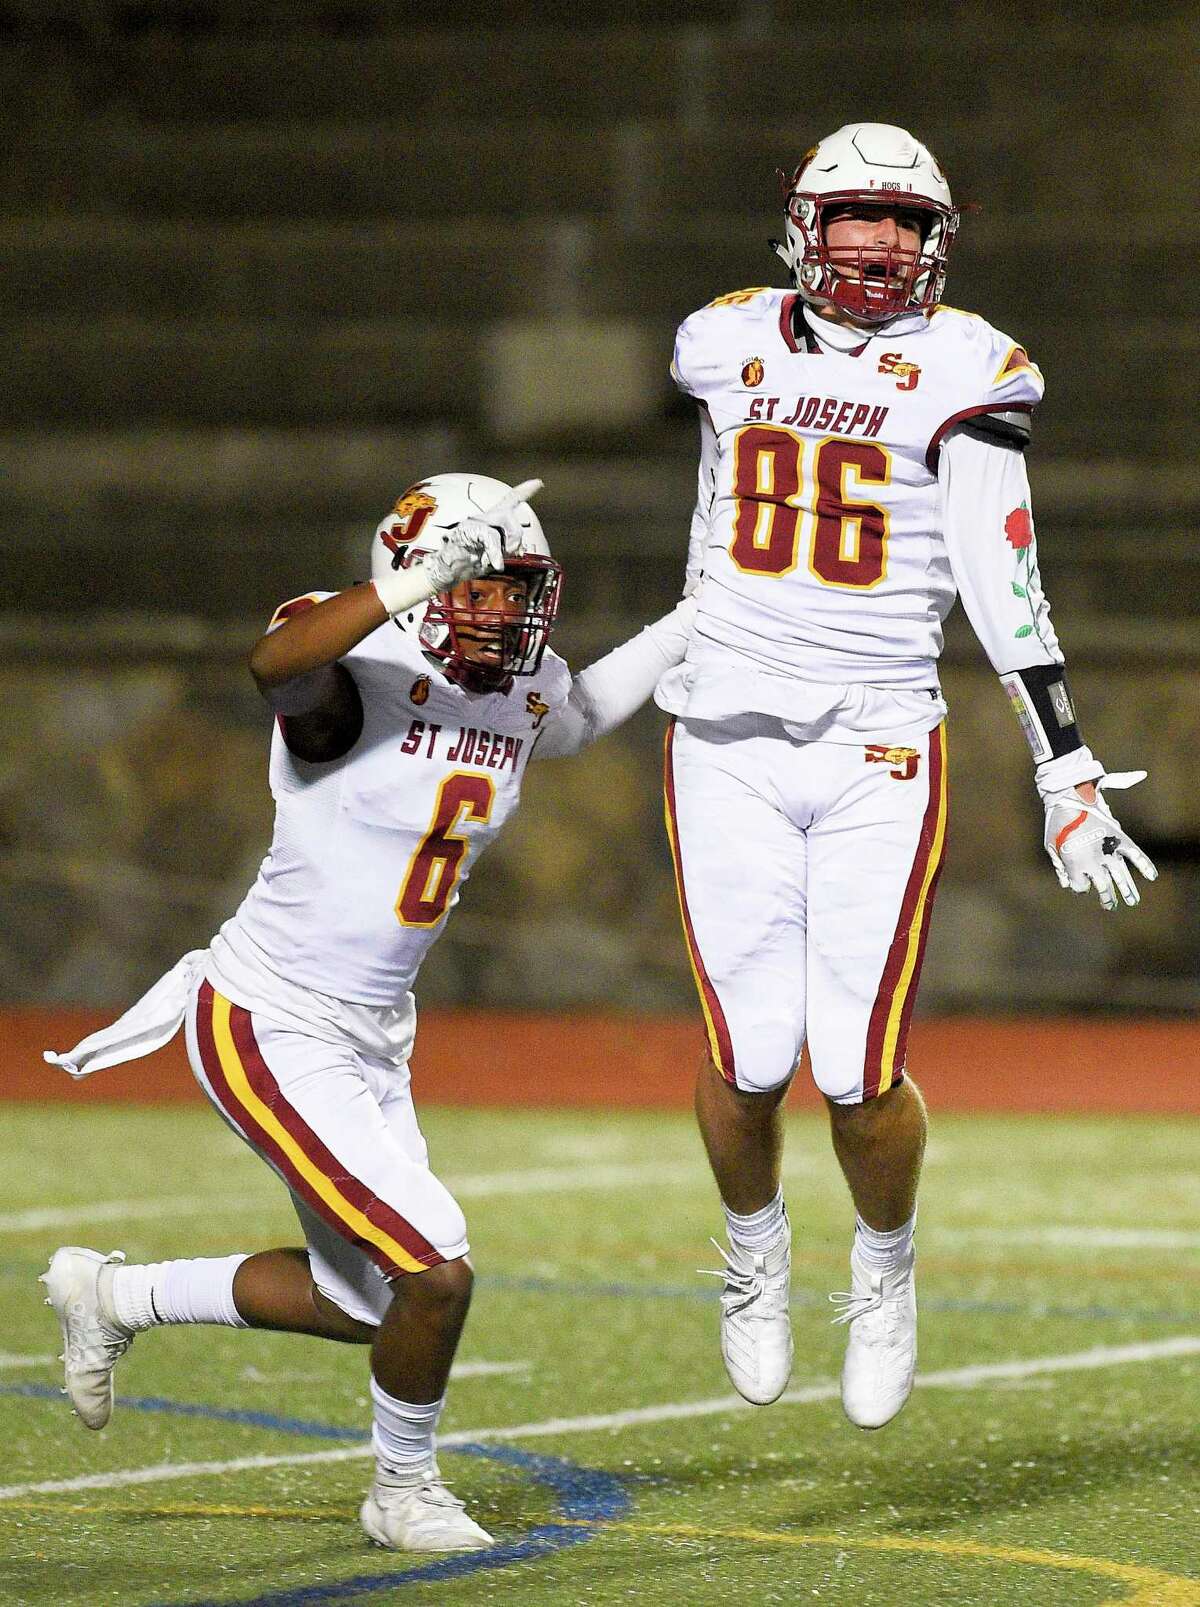 St. Joseph Noah Gage (6) celebrates with teammate Owen DaSilva (86) after DaSilva recovered a fumble on a botch Stamford punt snap in the endzone for a touchdown in the first quarter of a FCIAC football game against Stamford at Boyle Stadium on Nov. 22, 2019 in Stamford, Connecticut. St. Joseph won 58-0.